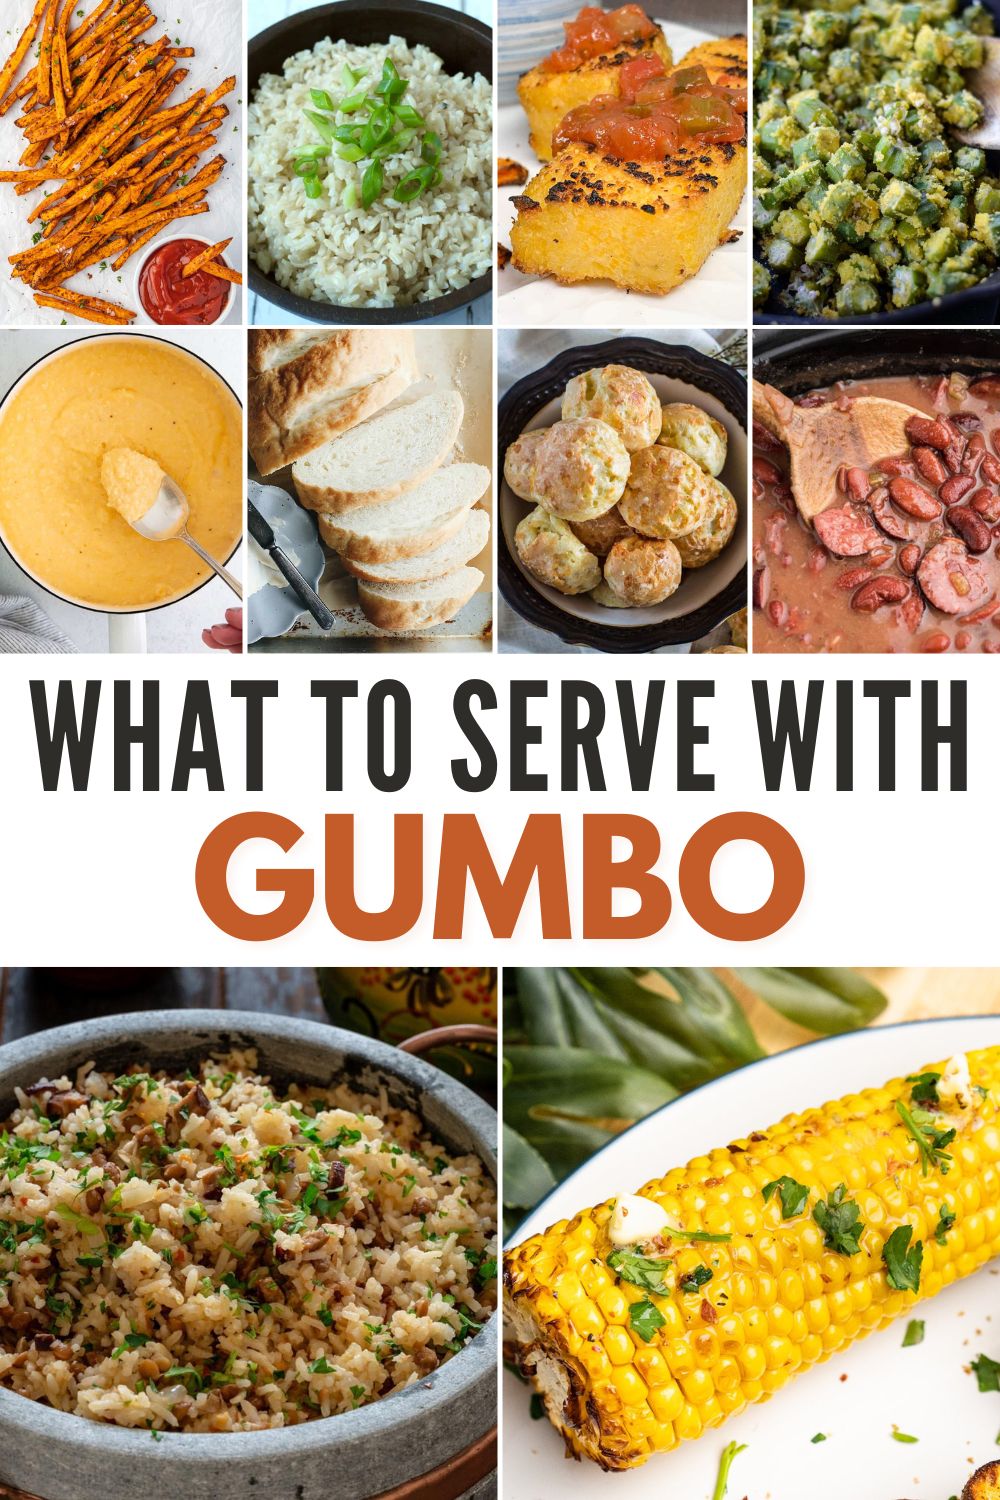 Looking for ideas on what to serve with gumbo? Look no further! Whether you're craving a traditional southern dish or want something unique to complement the rich flavors of gumbo, we have the perfect